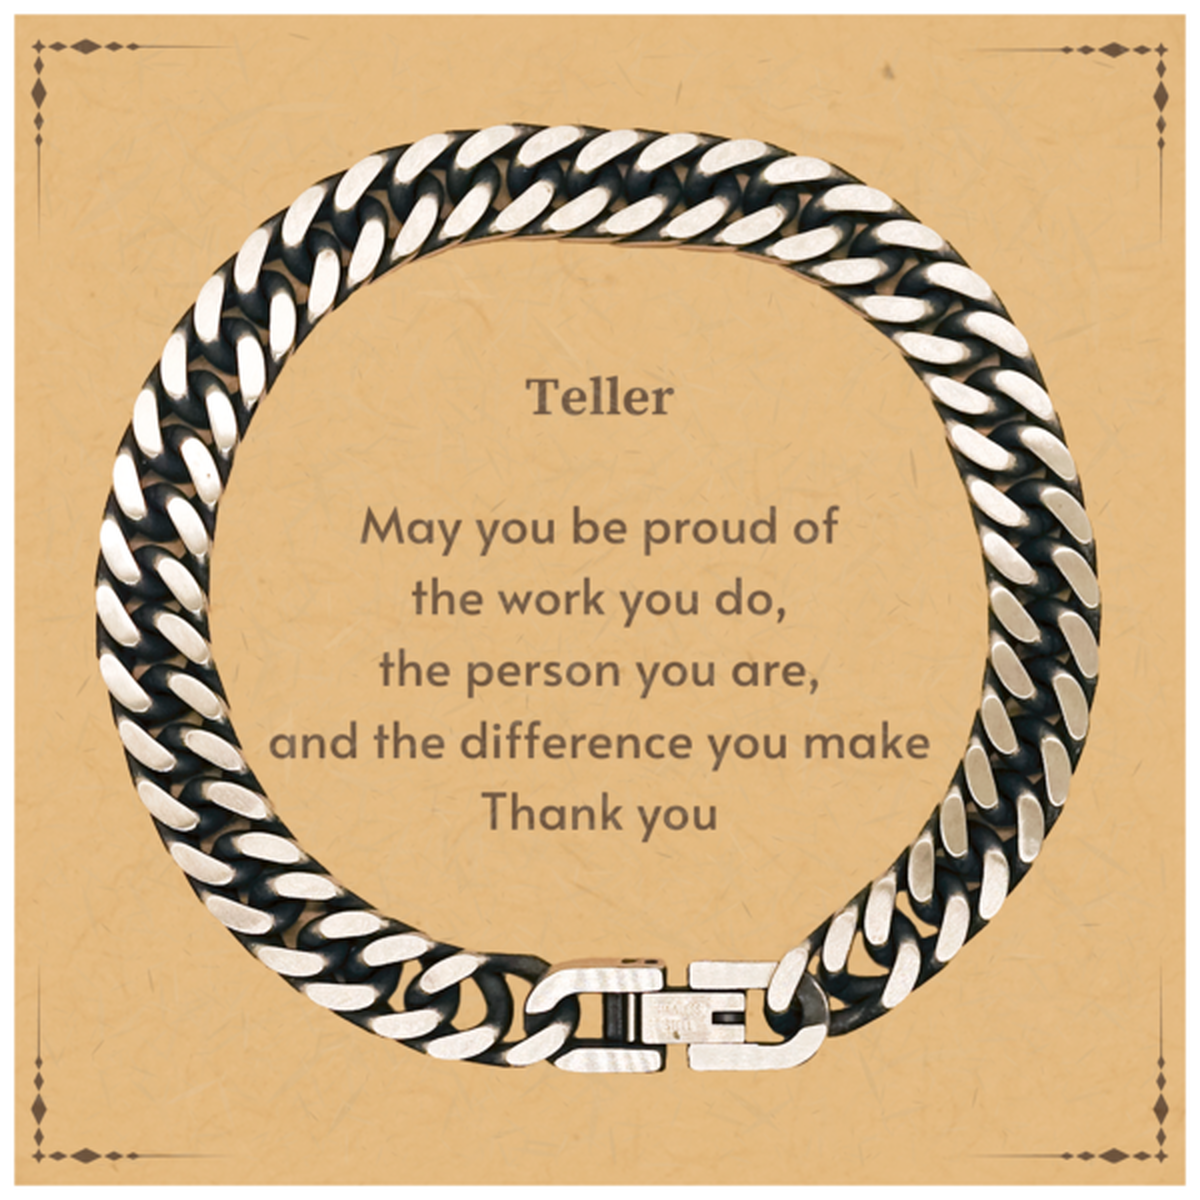 Heartwarming Cuban Link Chain Bracelet Retirement Coworkers Gifts for Teller, Teller May You be proud of the work you do, the person you are Gifts for Boss Men Women Friends